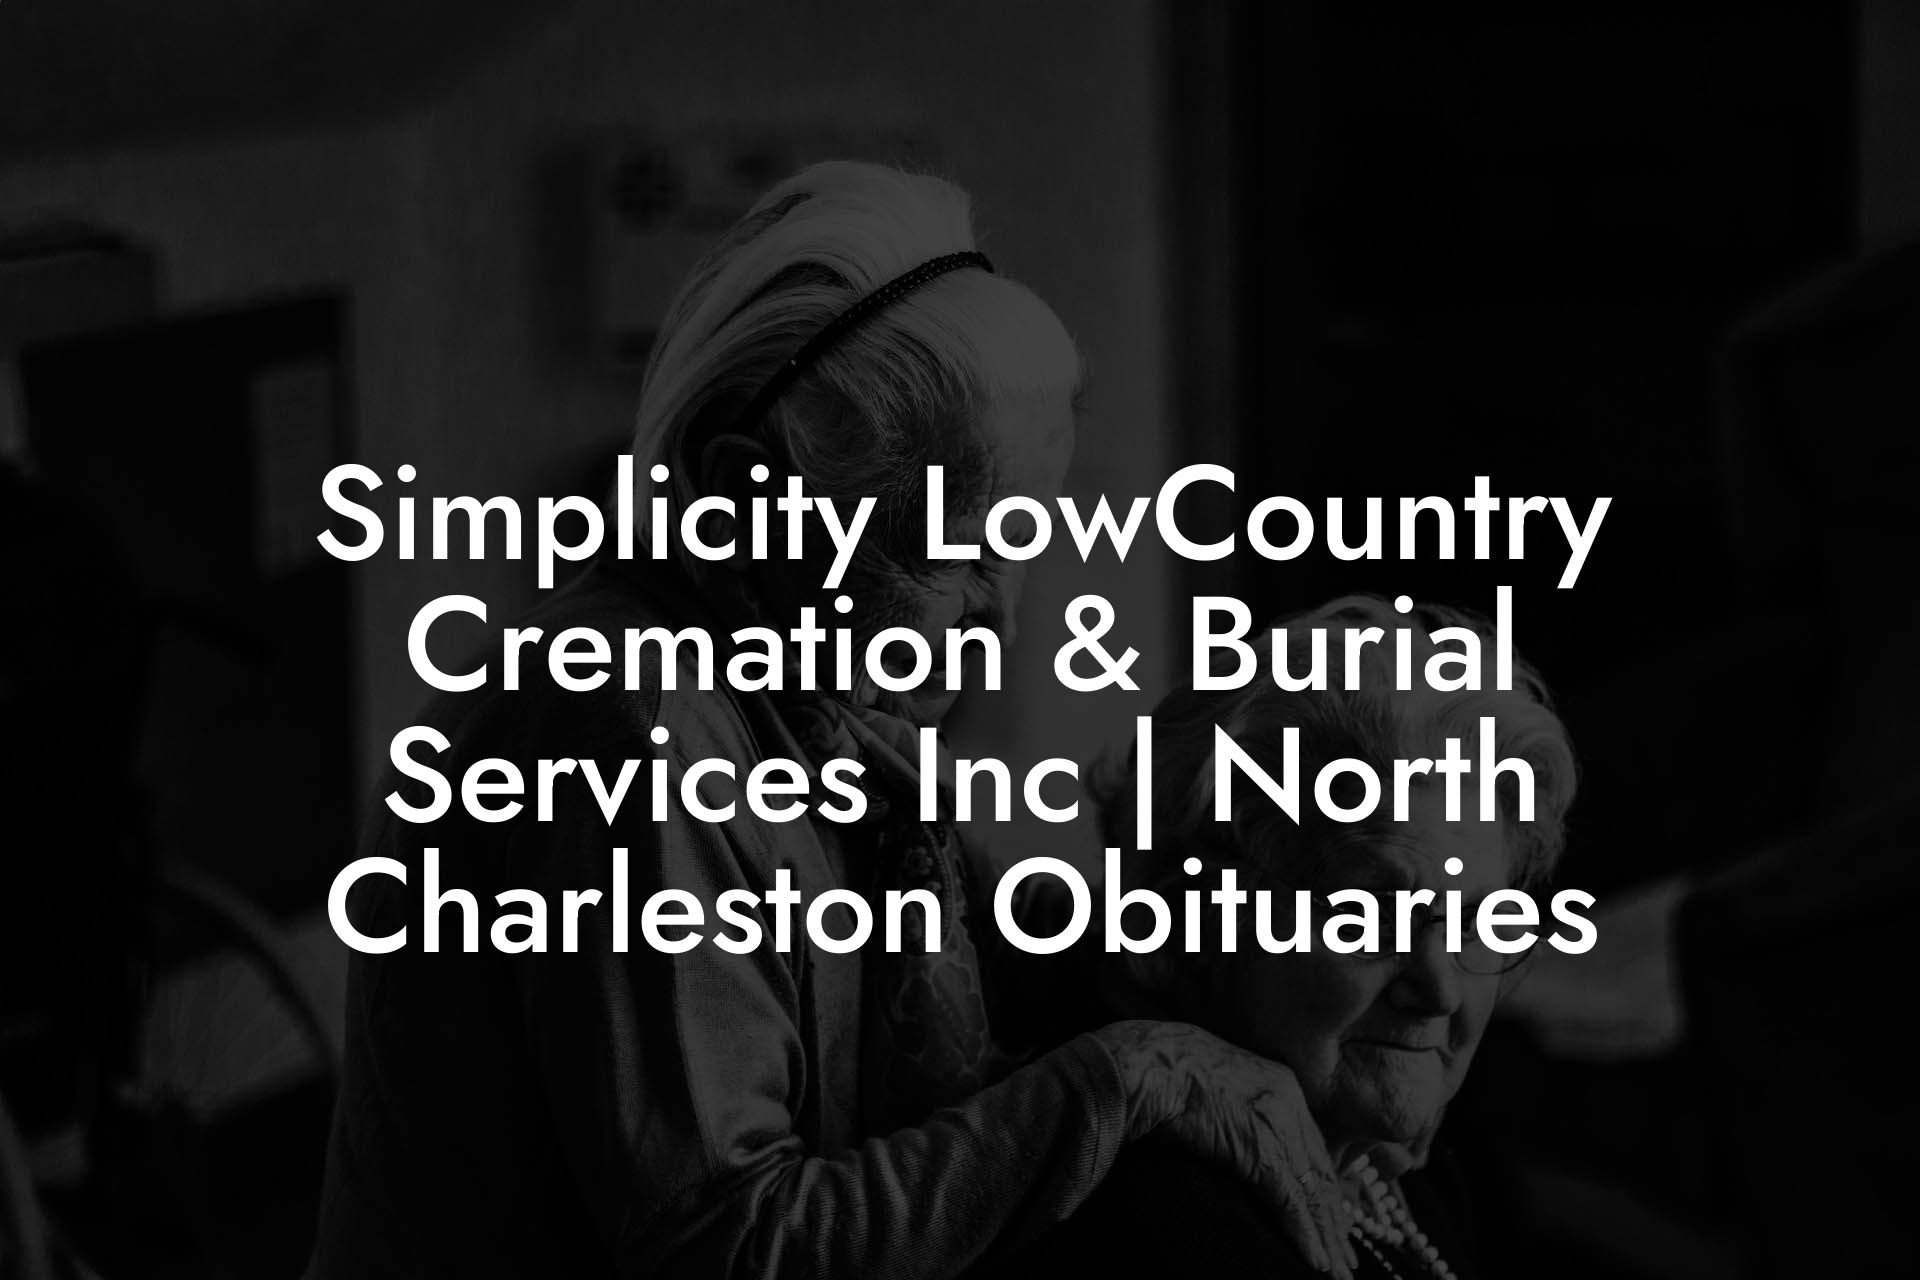 Simplicity LowCountry Cremation & Burial Services Inc | North Charleston Obituaries